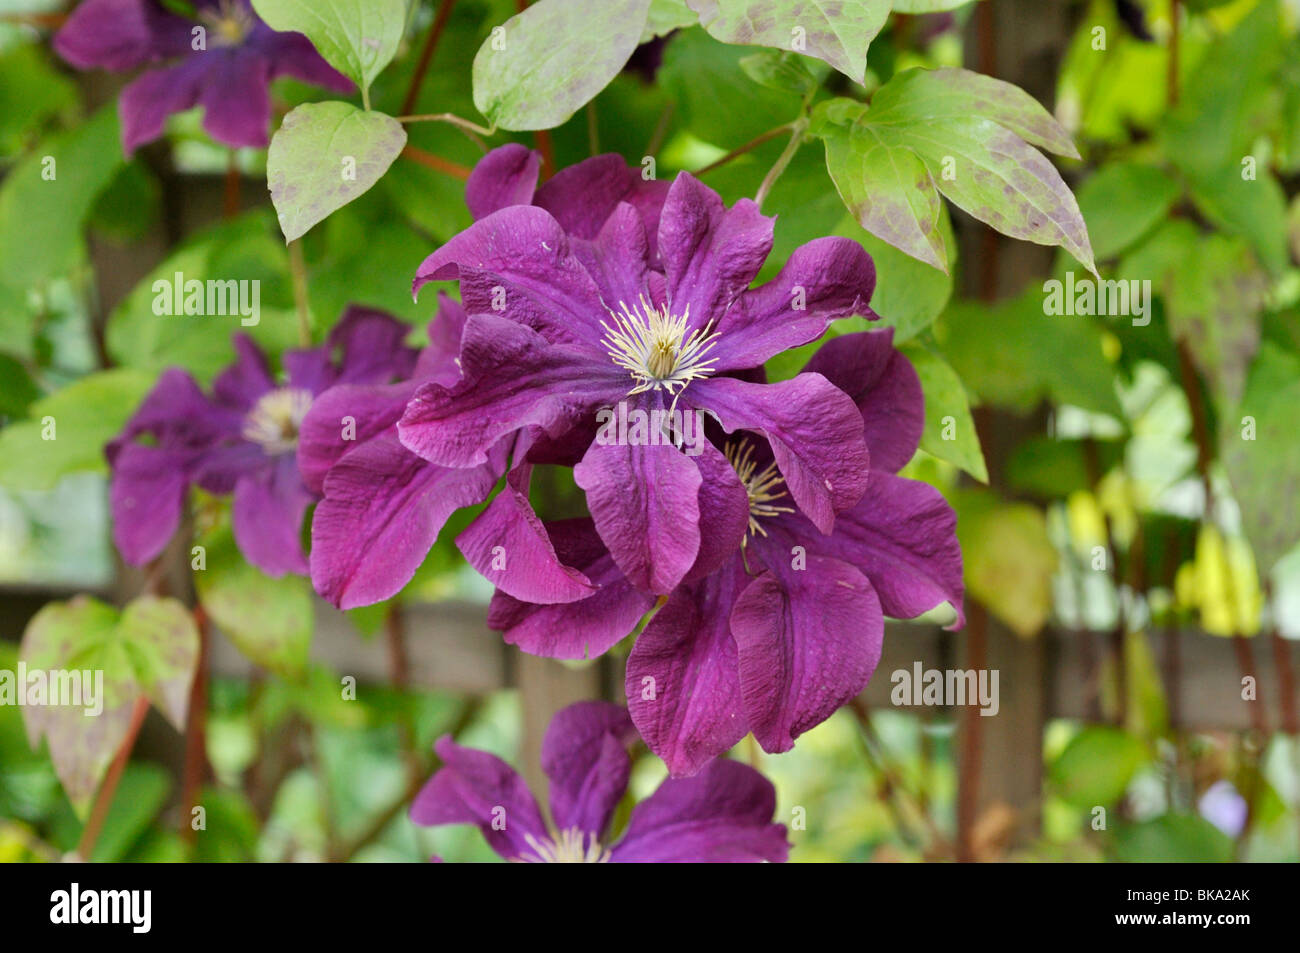 Clematis (Clematis Etoile Violette) Stock Photo